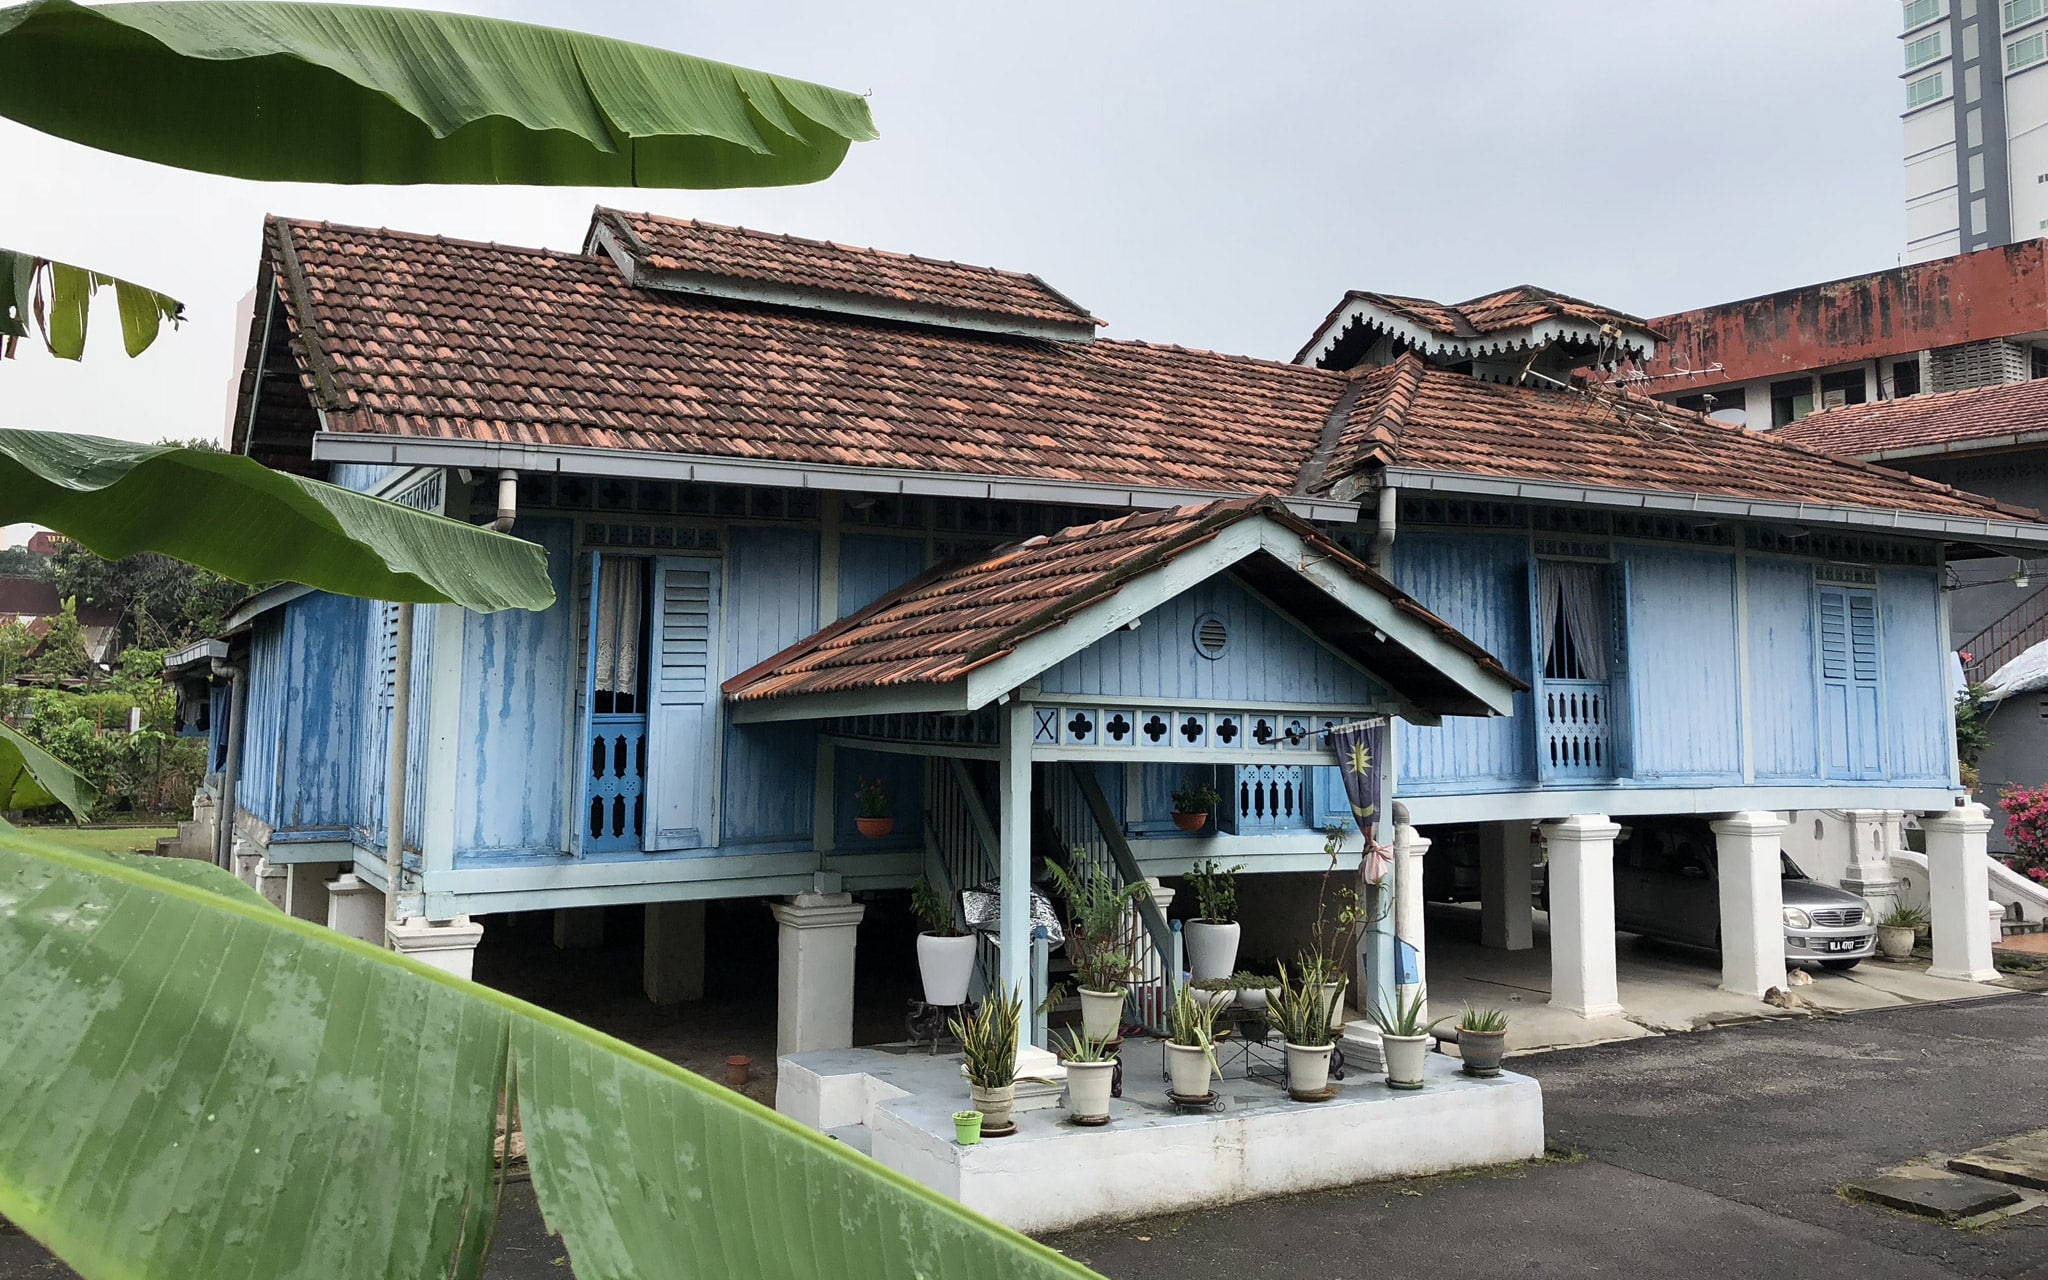 LokaLocal connects you to Malaysian experts like Elena of Bike with Elena, who will take you to hidden gems in the city, like this traditional house in quaint Kampung Bahru right in the middle of the the city.